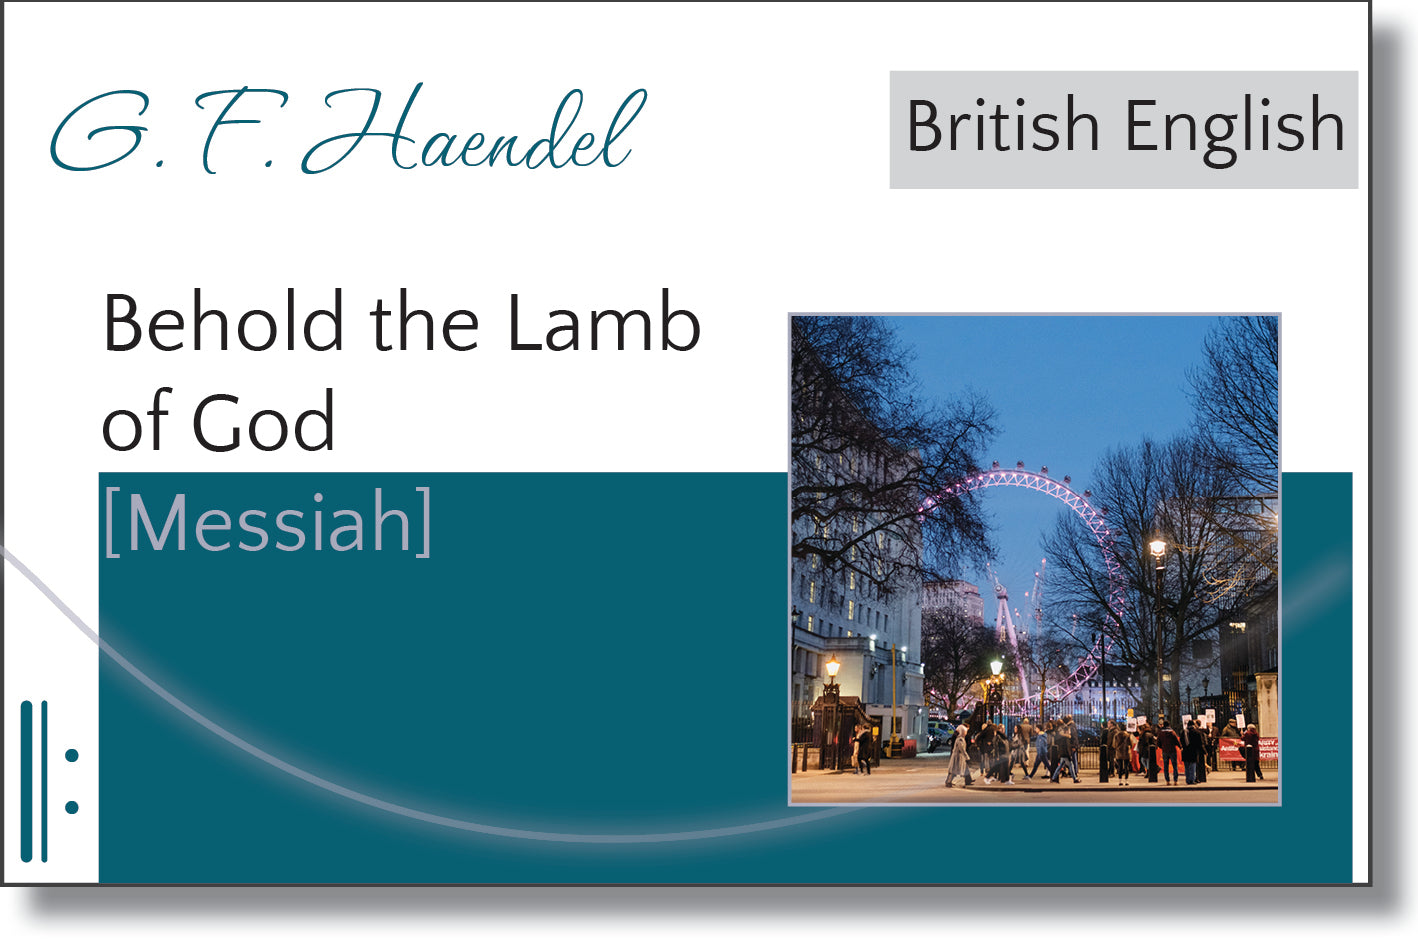 Messiah - Behold the Lamb of God